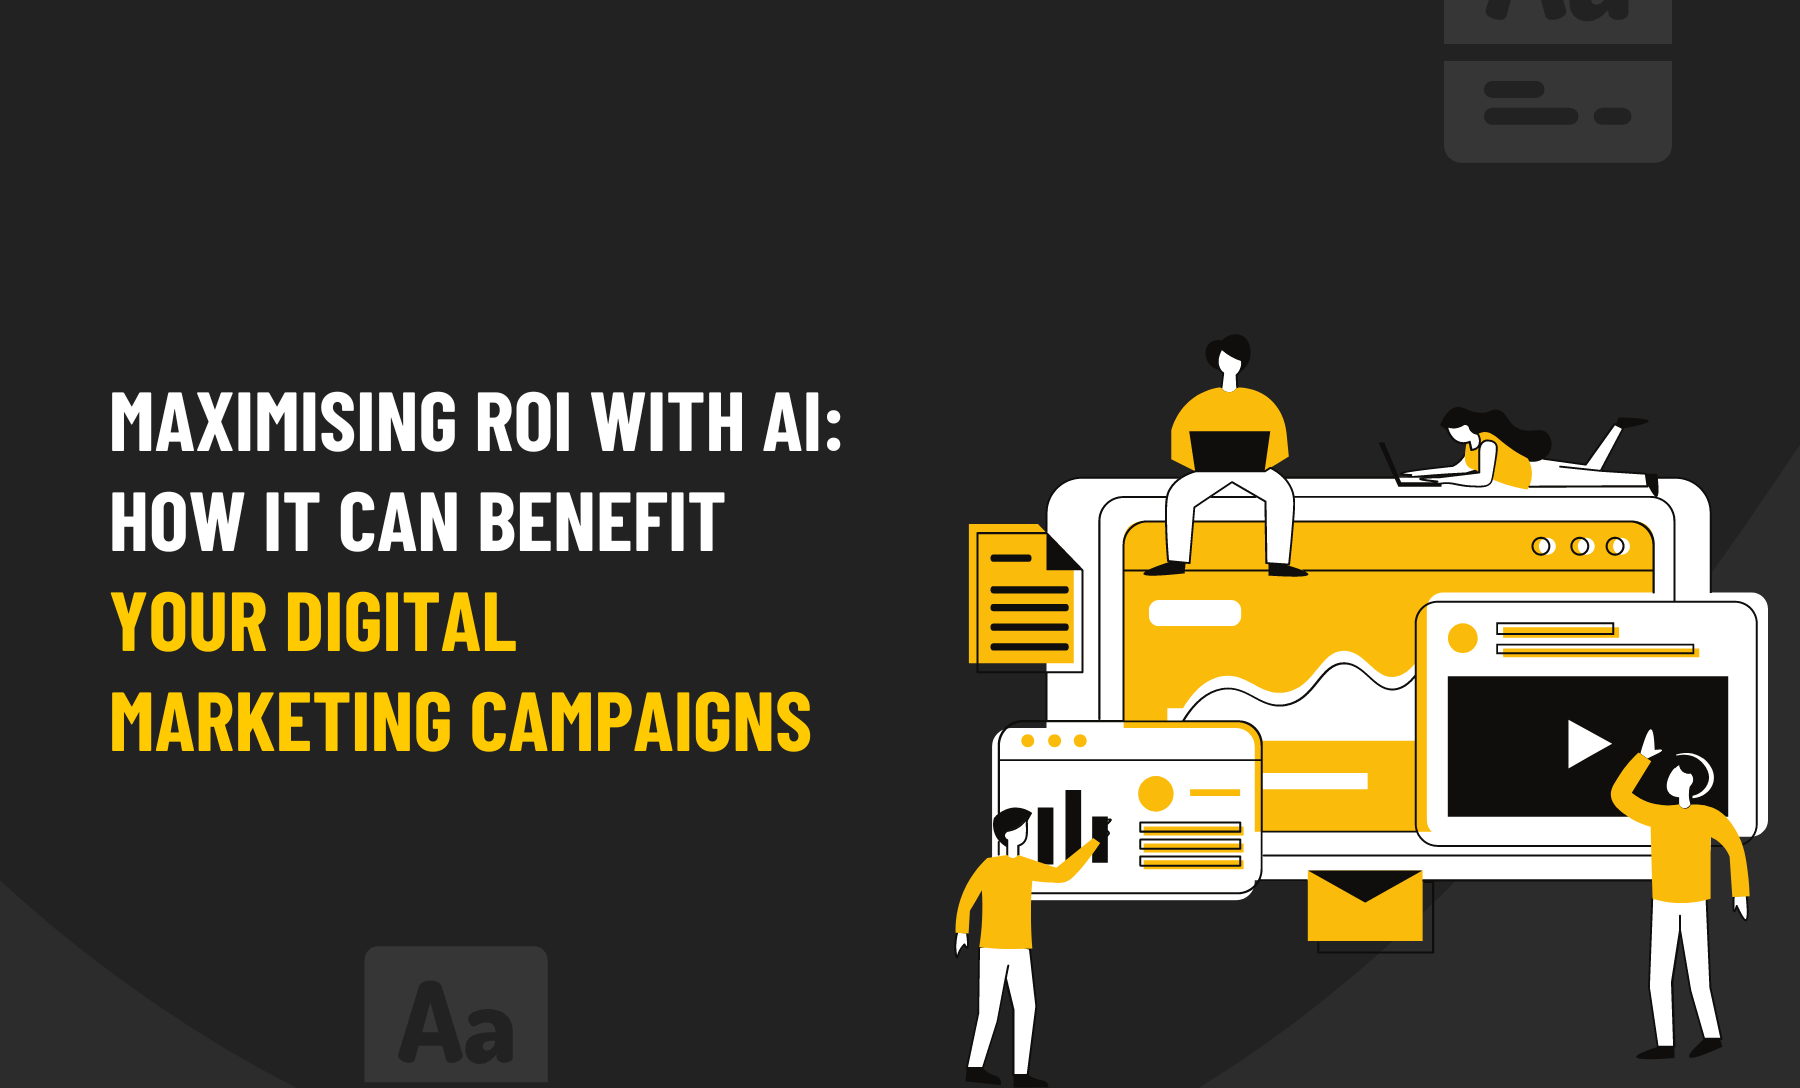 Maximising-ROI-with-AI-How-it-Can-Benefit-Your-Digital-Marketing-Campaigns-Pearl-Lemon.png